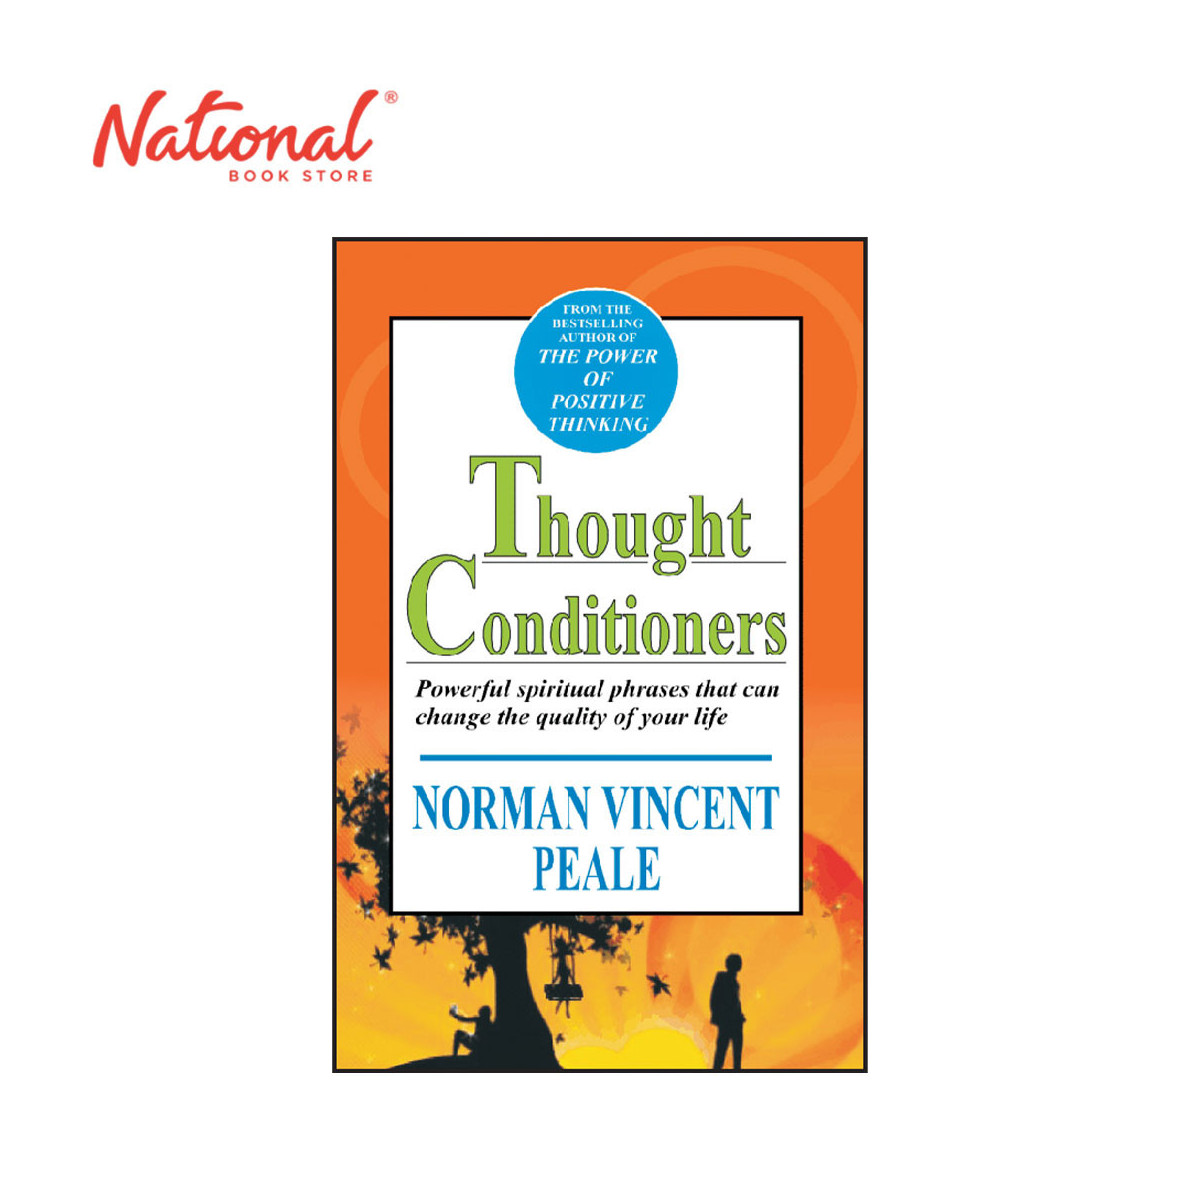 Thoughts Conditioners by Norman Vincent Peale - Trade Paperback - Self-Help Books